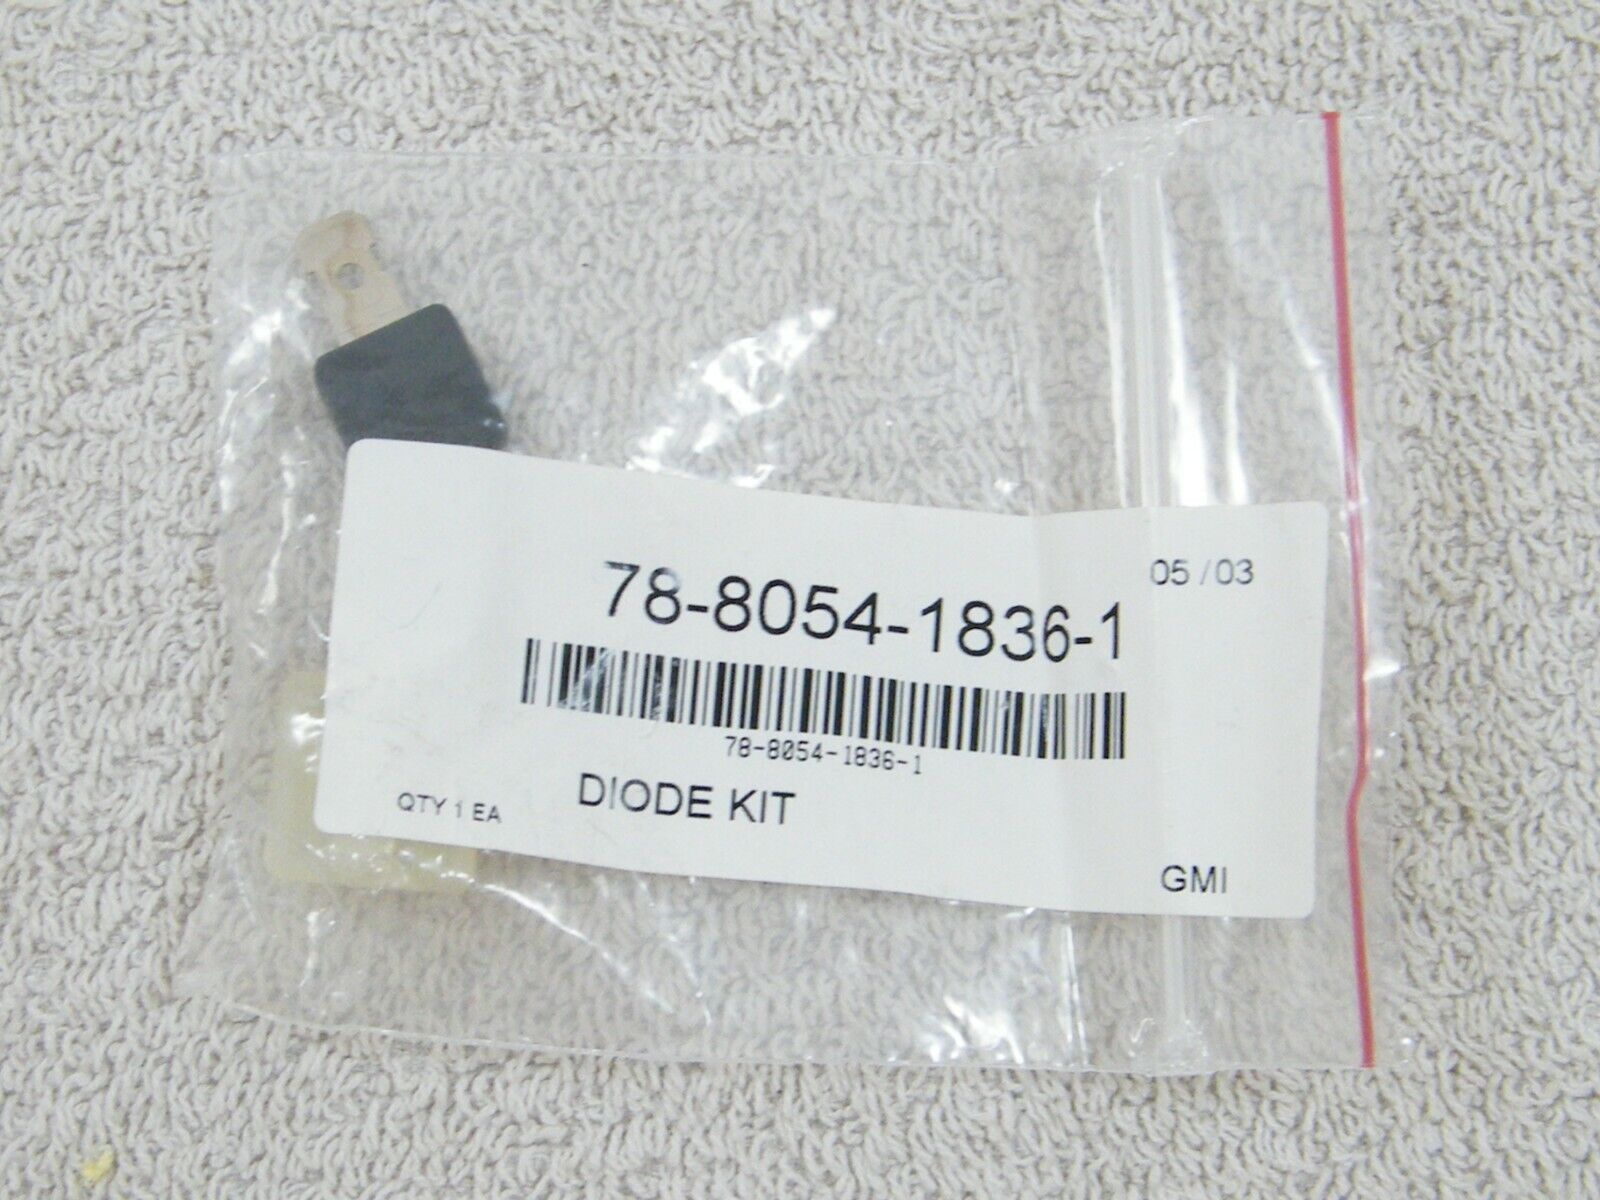 DIODE KIT 78-8054-1836-1 OVERHEAD PROJECTOR